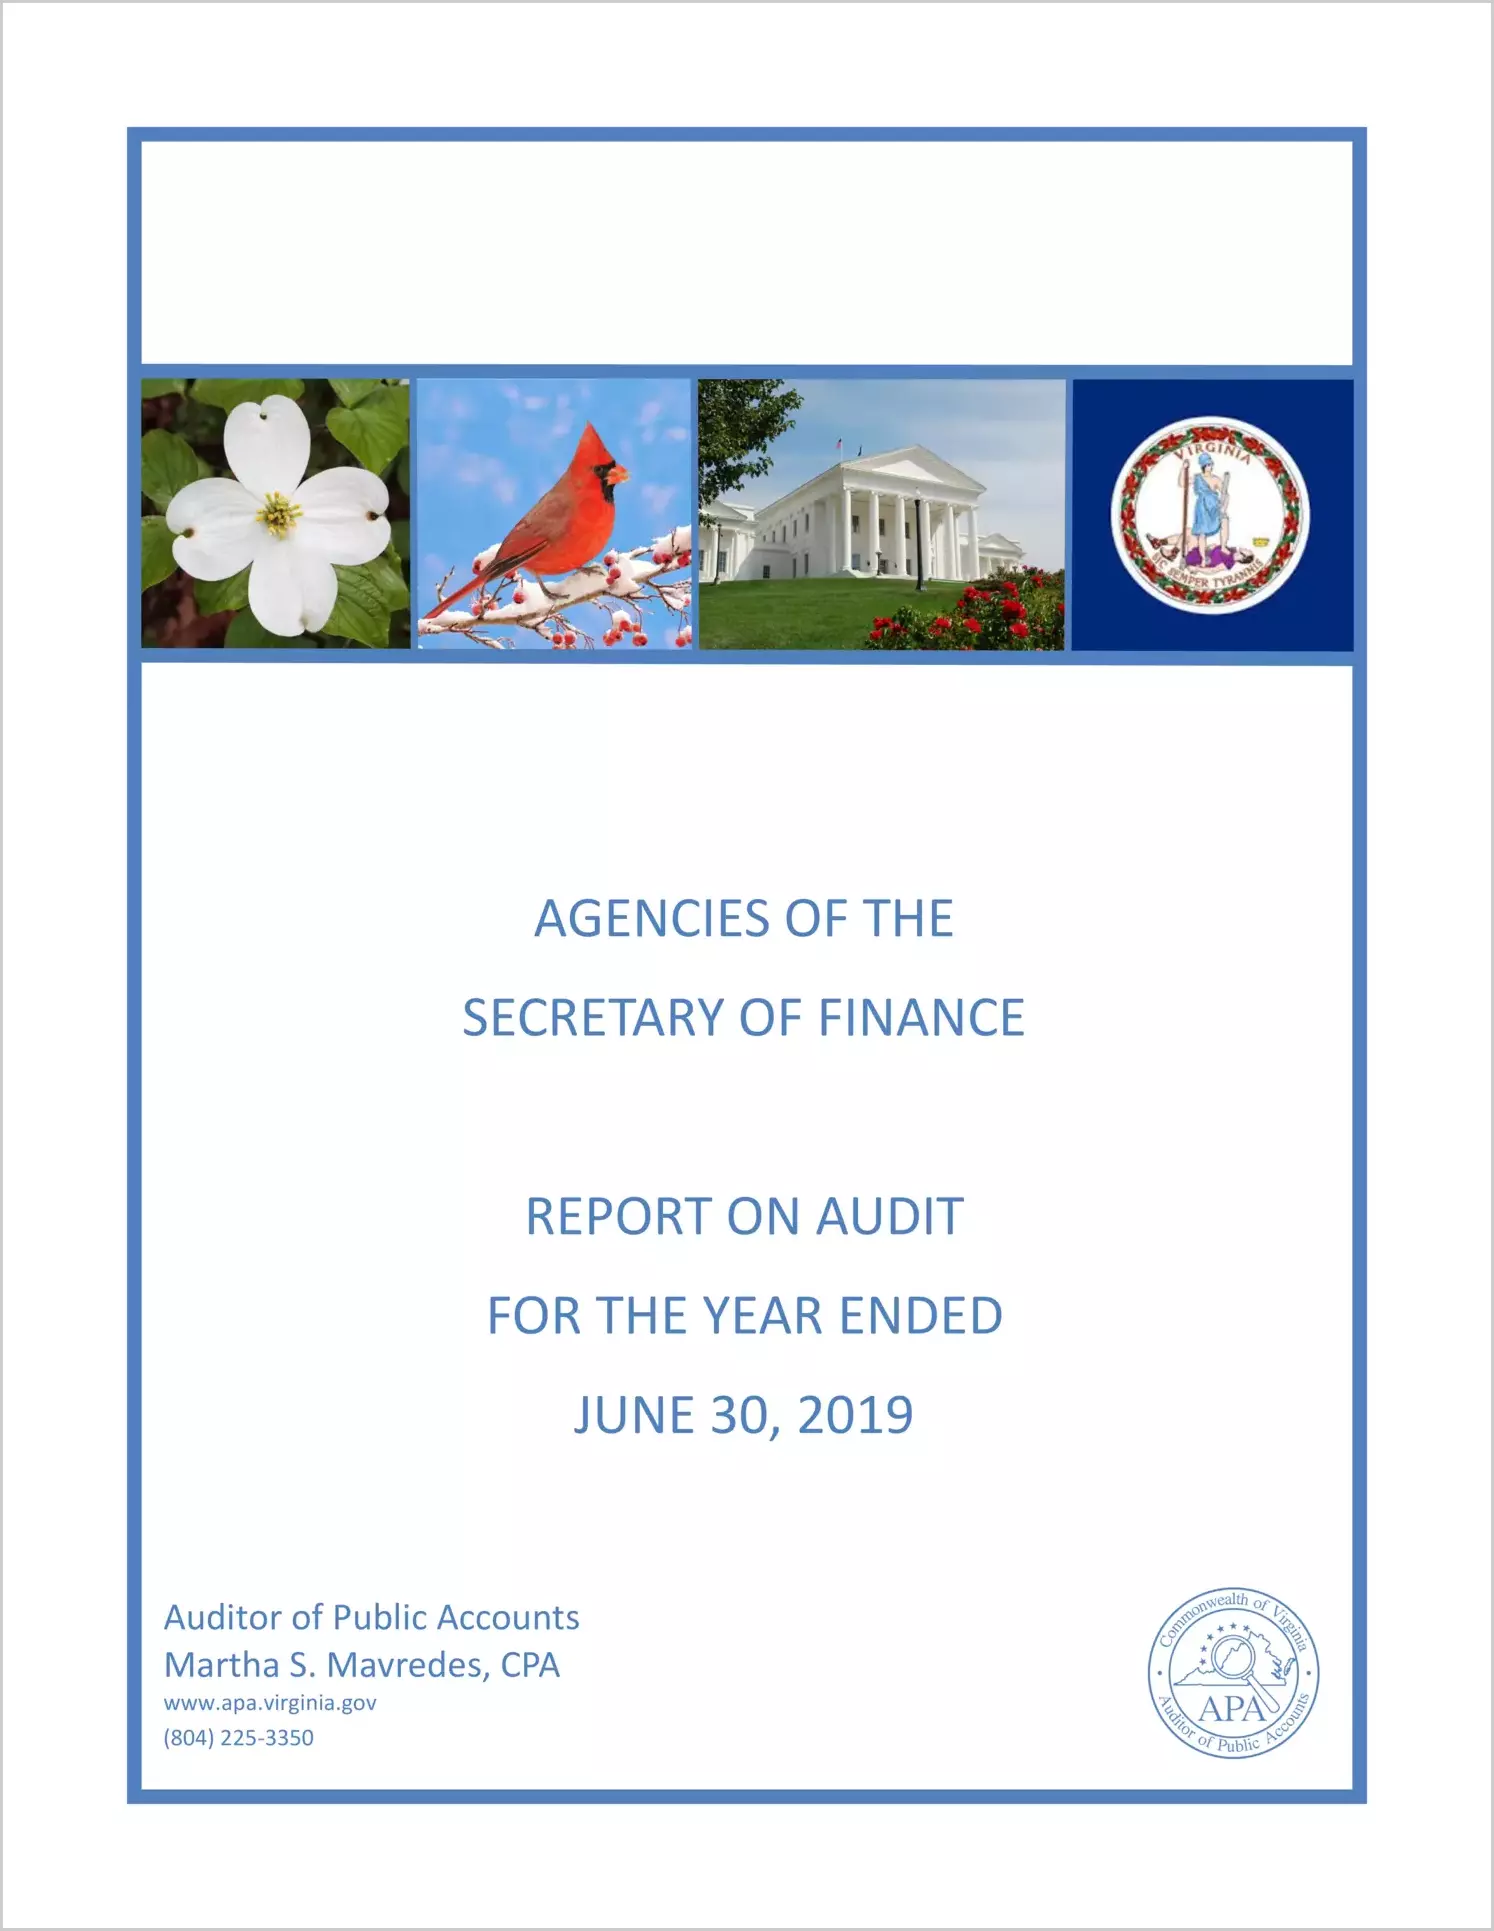 Agencies of the Secretary of Finance for the year ended 2019